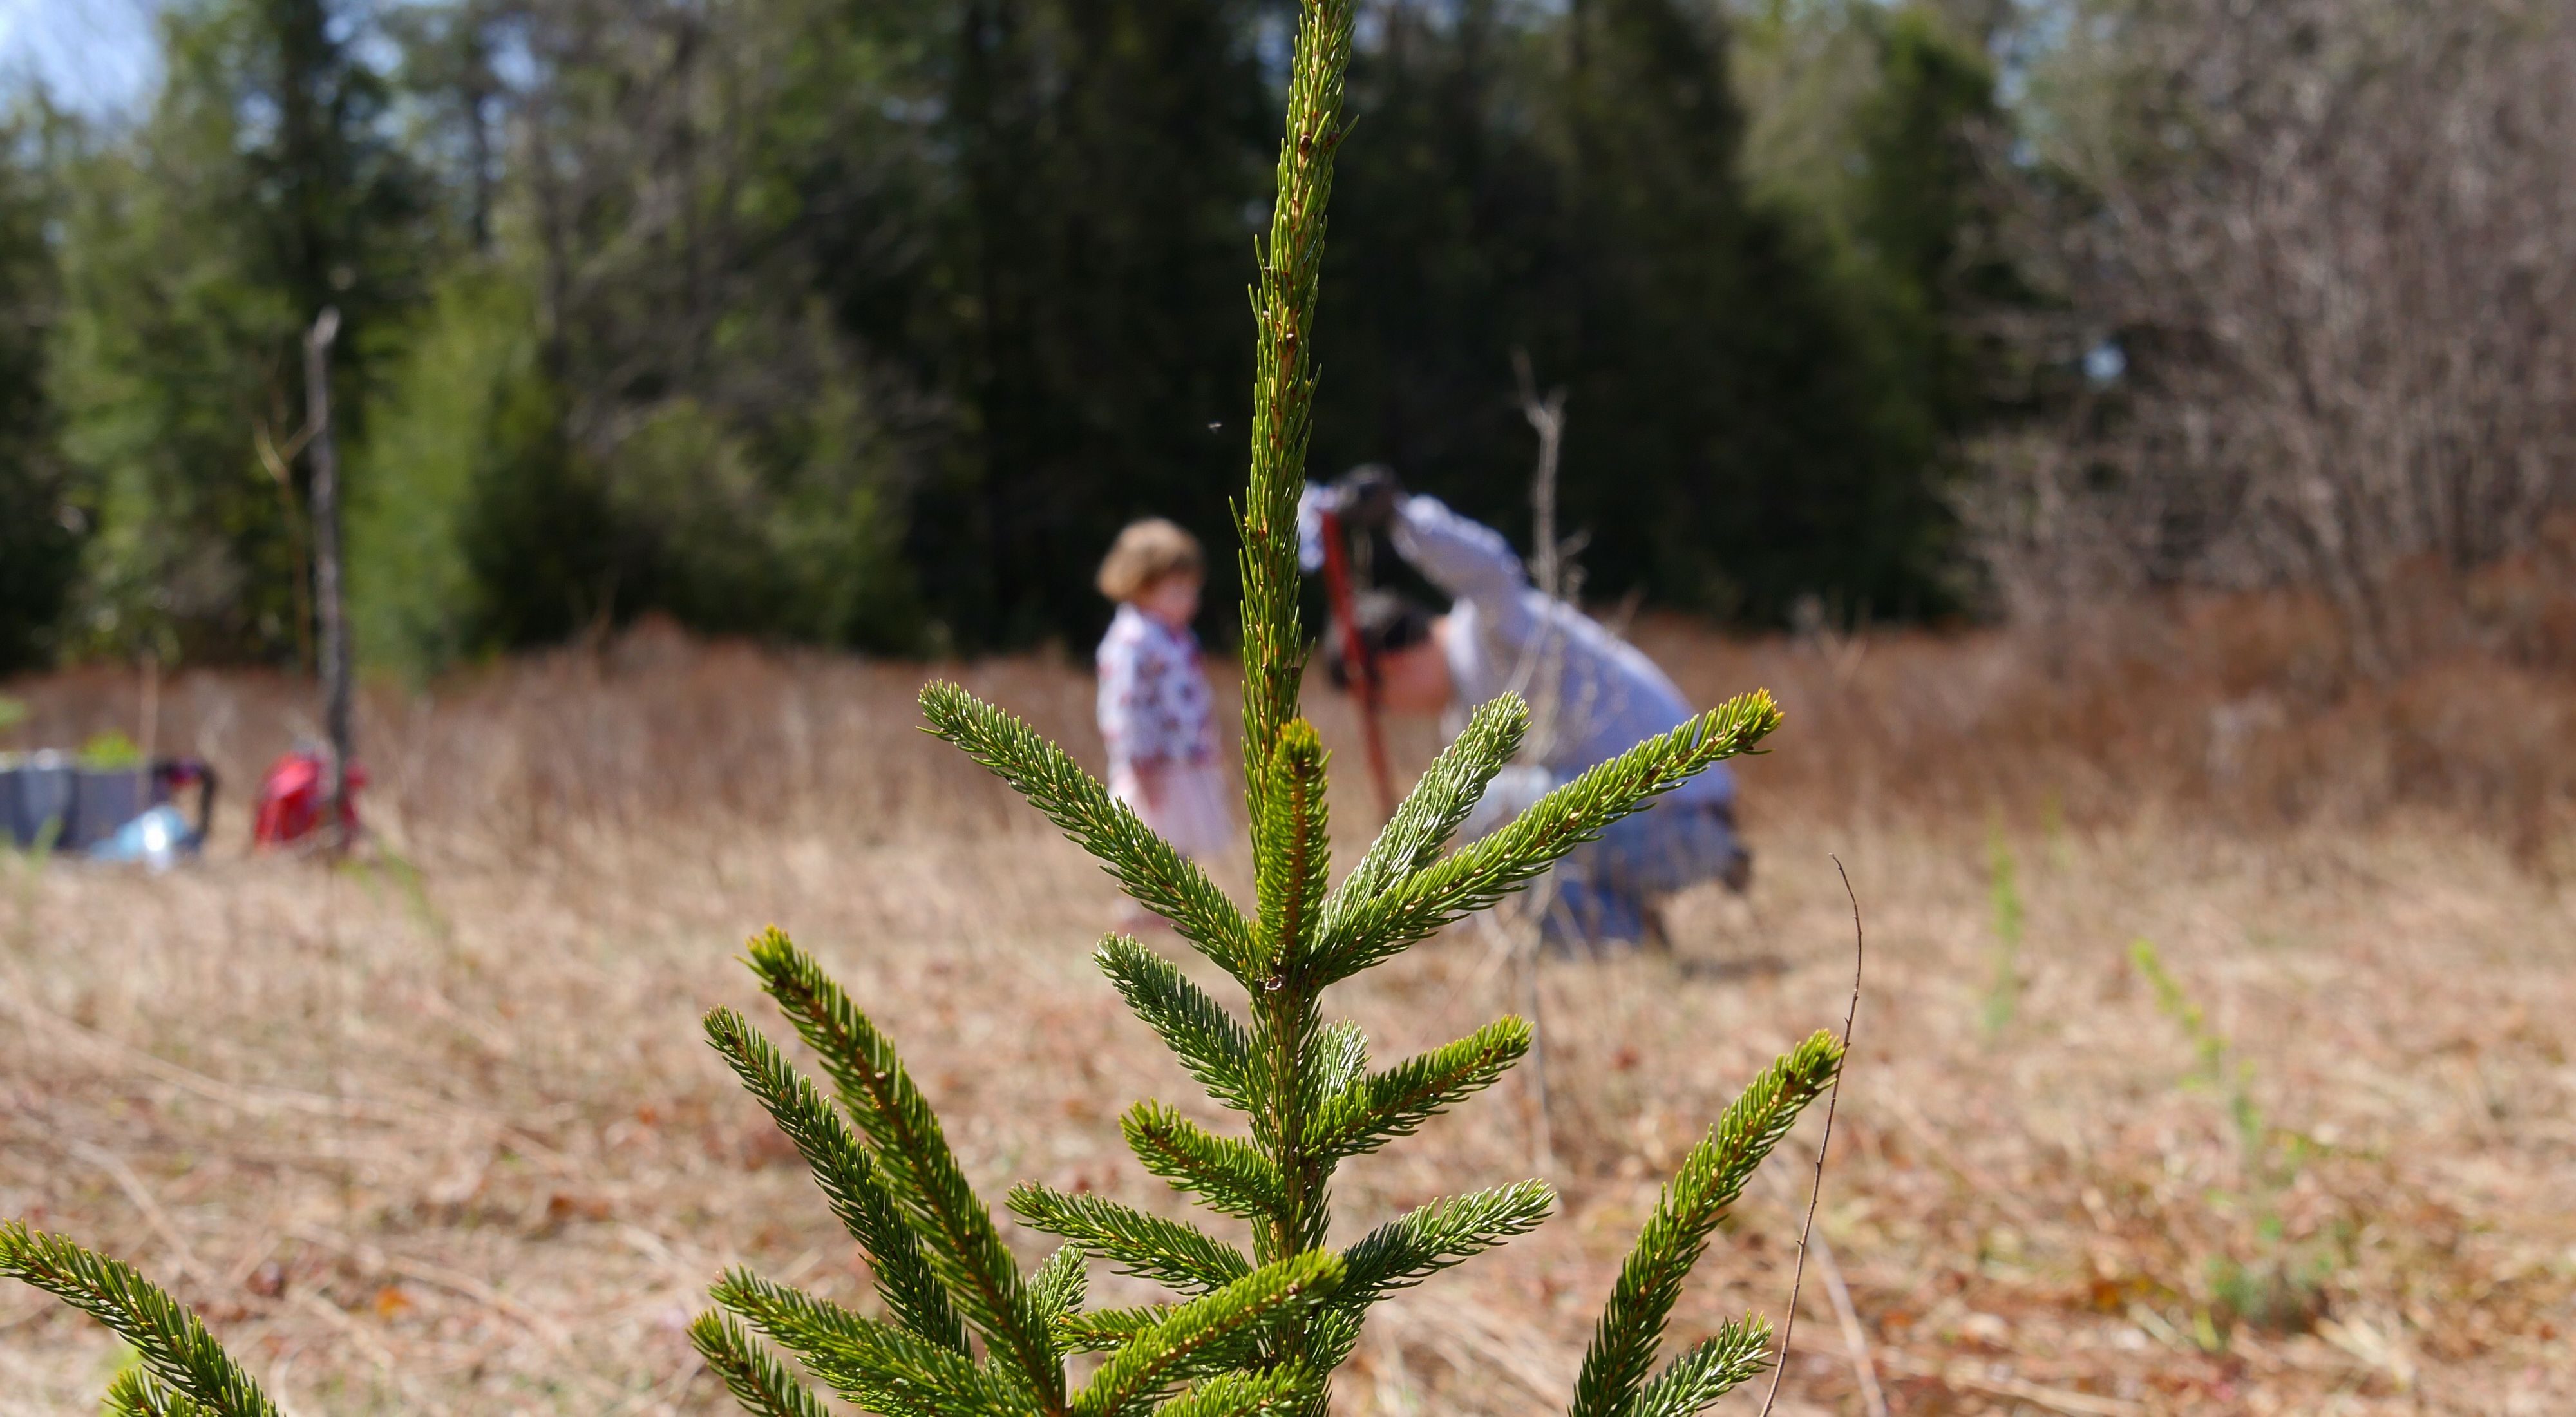 A man and young girl kneel on the ground planting a red spruce seedling in an open field lined with mature trees. They are partially obscured by the top of a juvenile spruce framed in the foreground.